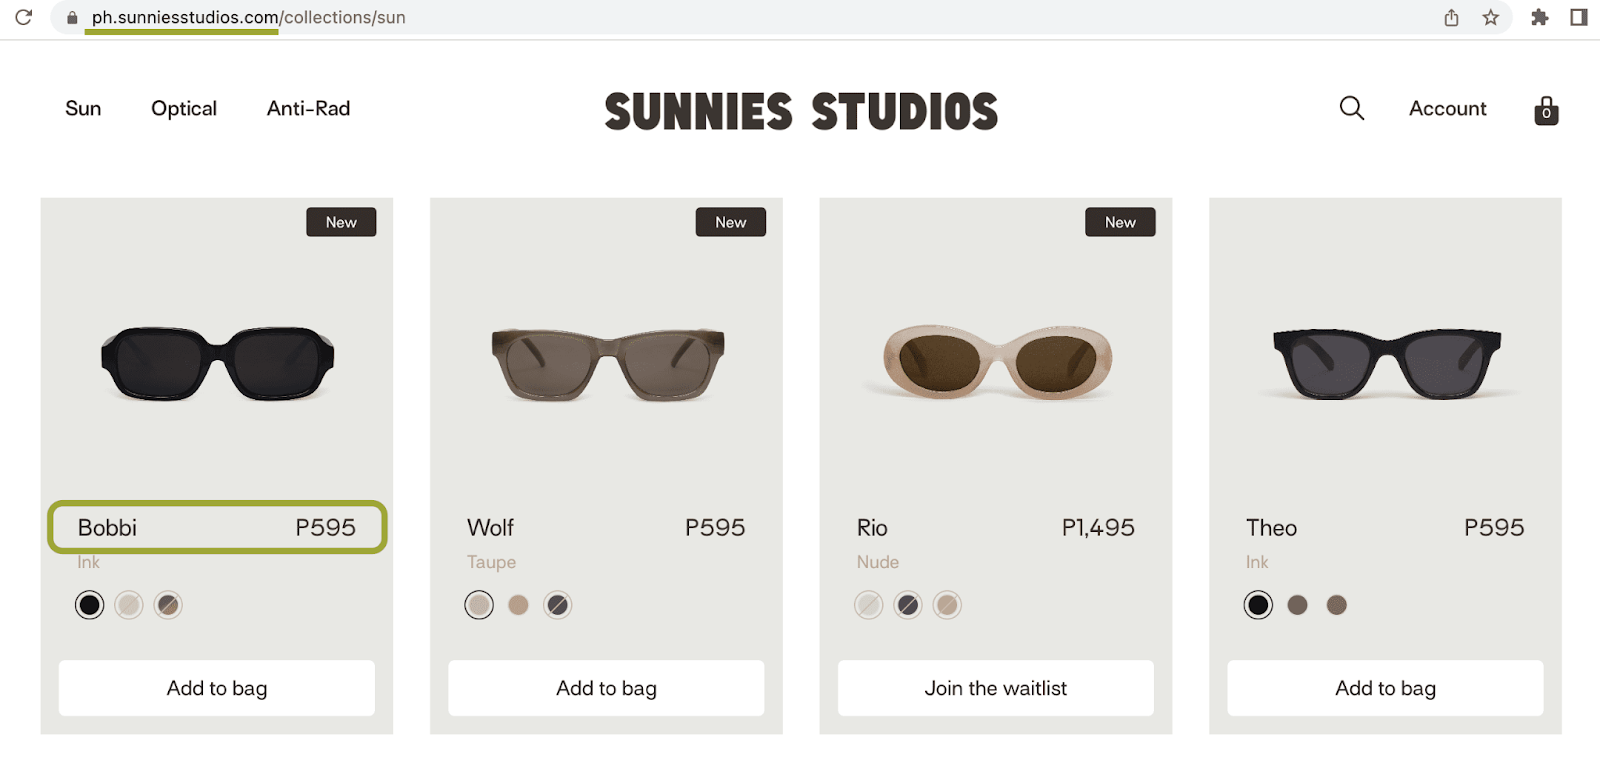 Screenshot of Sunnies Studios website showing sunglasses for sale with Philippine Peso prices